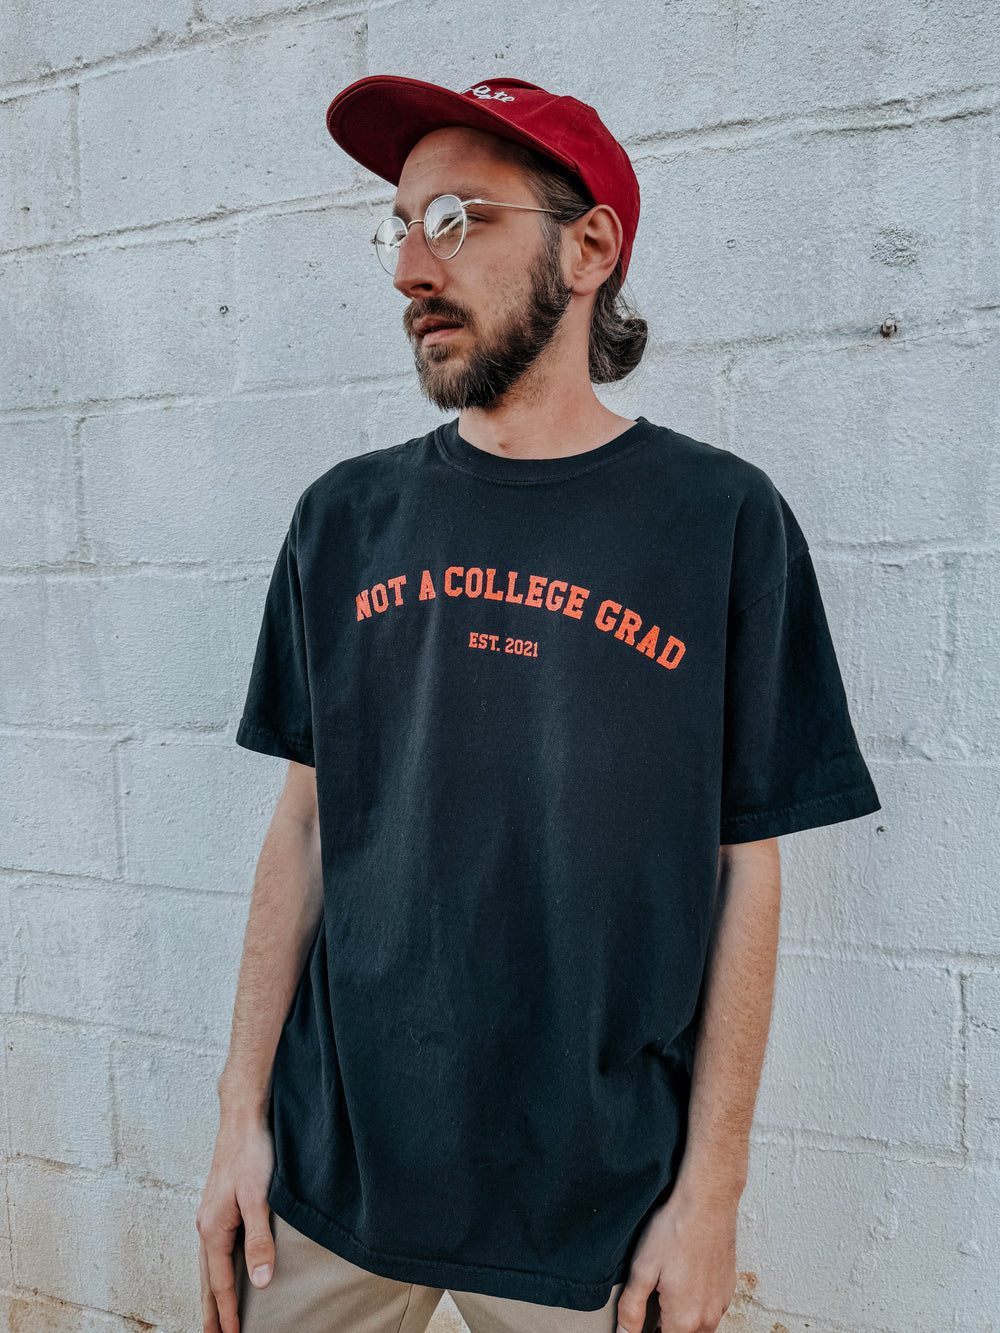 Not A College Grad Graphic T-Shirt - Red on Black